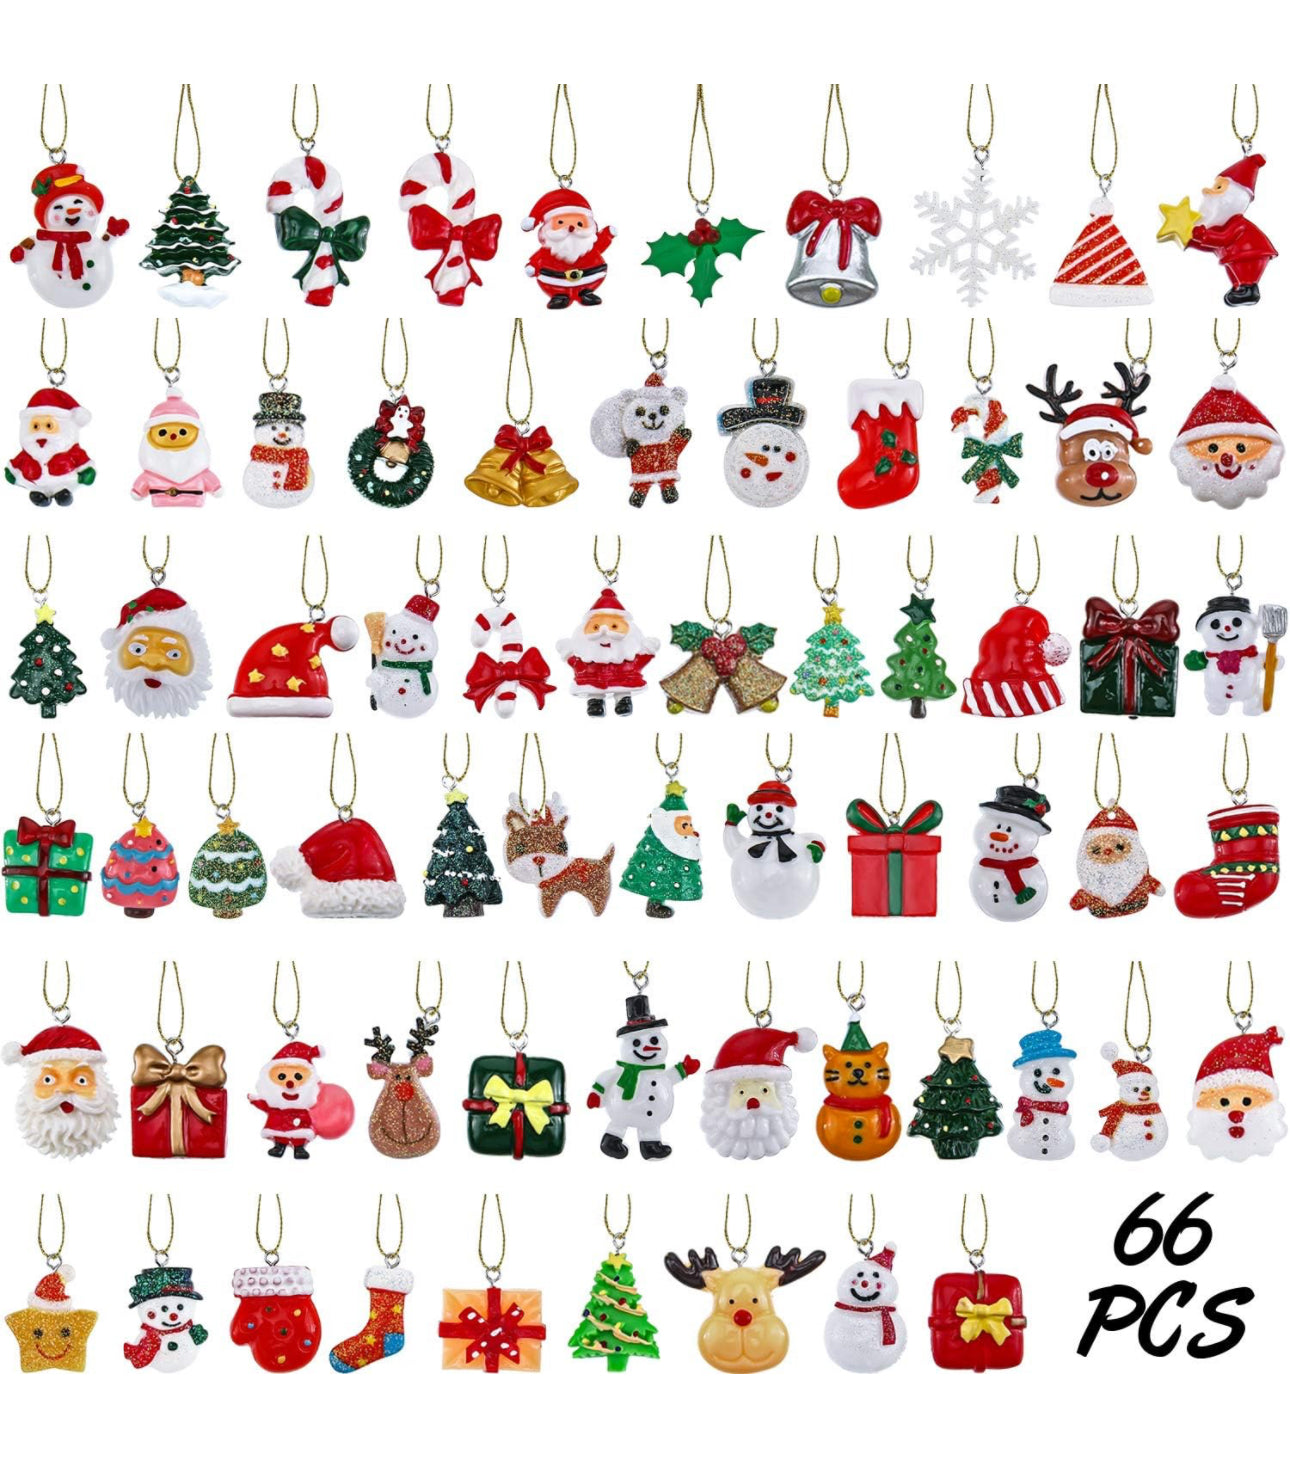 66 Pieces Mini Resin Miniature Ornaments Tiny Christmas Pendant Decoration with 65.6 Feet Gold Embroidery Thread for Christmas Tree